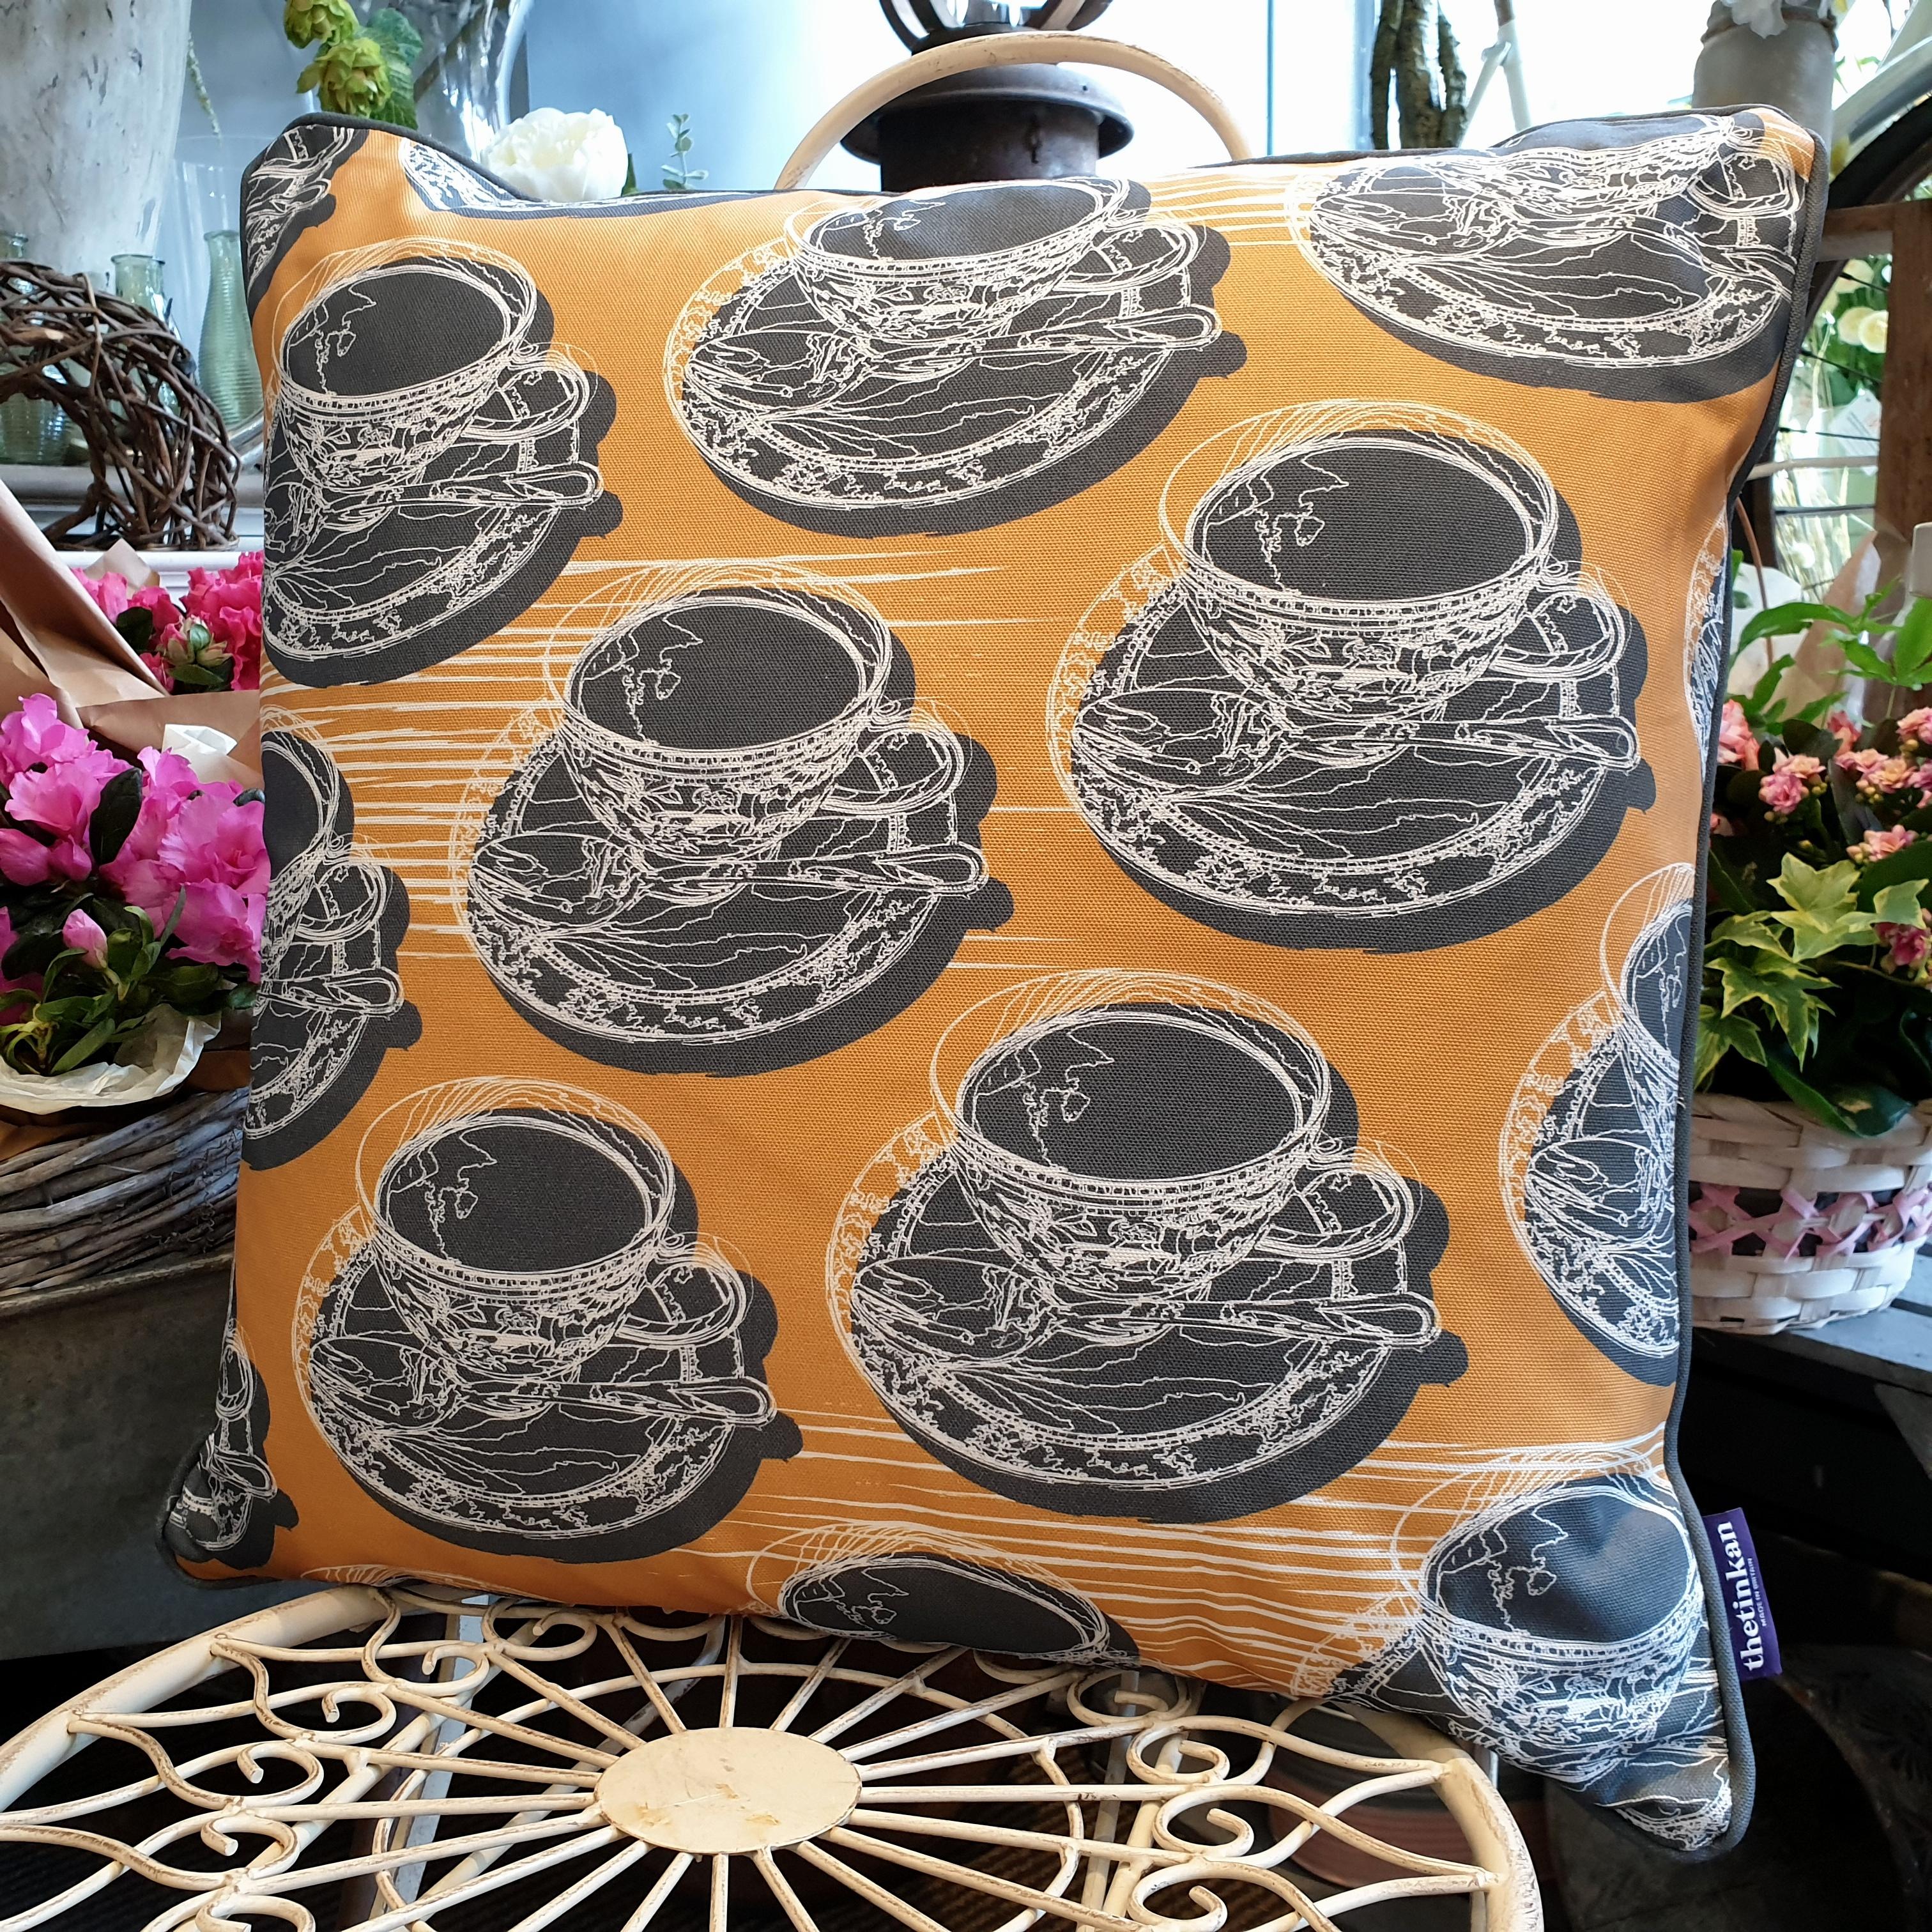 Double-sided mustard yellow 51cm square retro Afternoon Tea cushion with artistic white shards and grey handcrafted piping designed by thetinkan. White traced outline of multiple British teacups and saucers each colour filled in charcoal grey. Available with an optional luxury cushion inner pad. VIEW PRODUCT >>